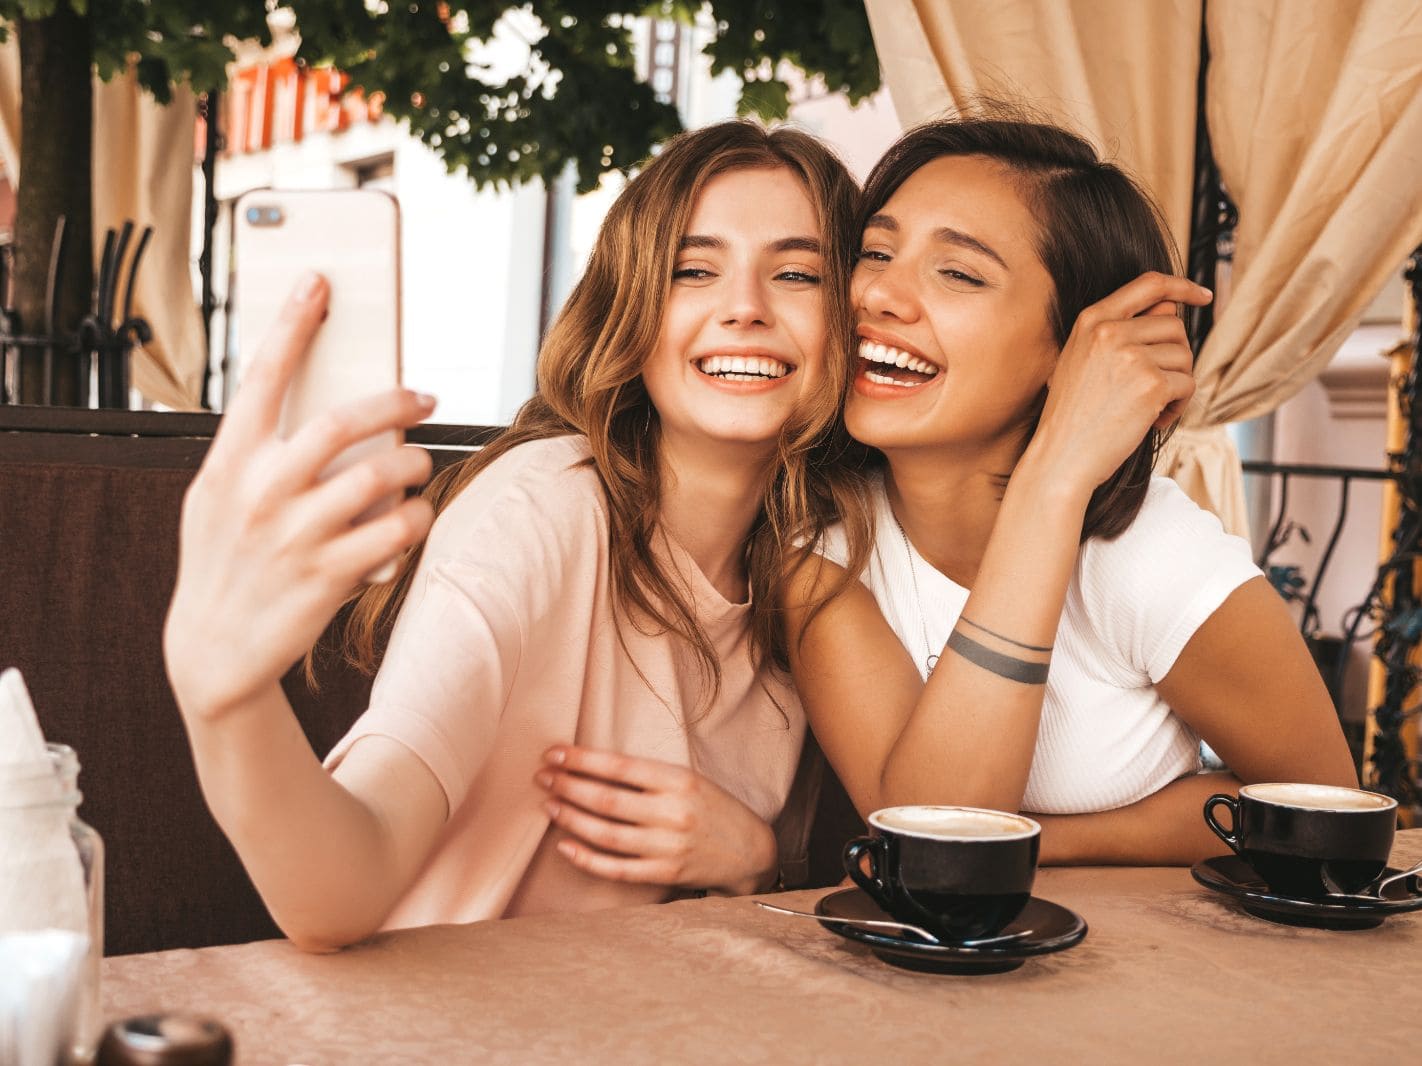 two-young-beautiful-smiling-hipster-girls-trendy-summer-clothes-carefree-women-chatting-veranda-cafe-drinking-coffee-positive-models-having-fun-taking-selfie-smartphone (1)